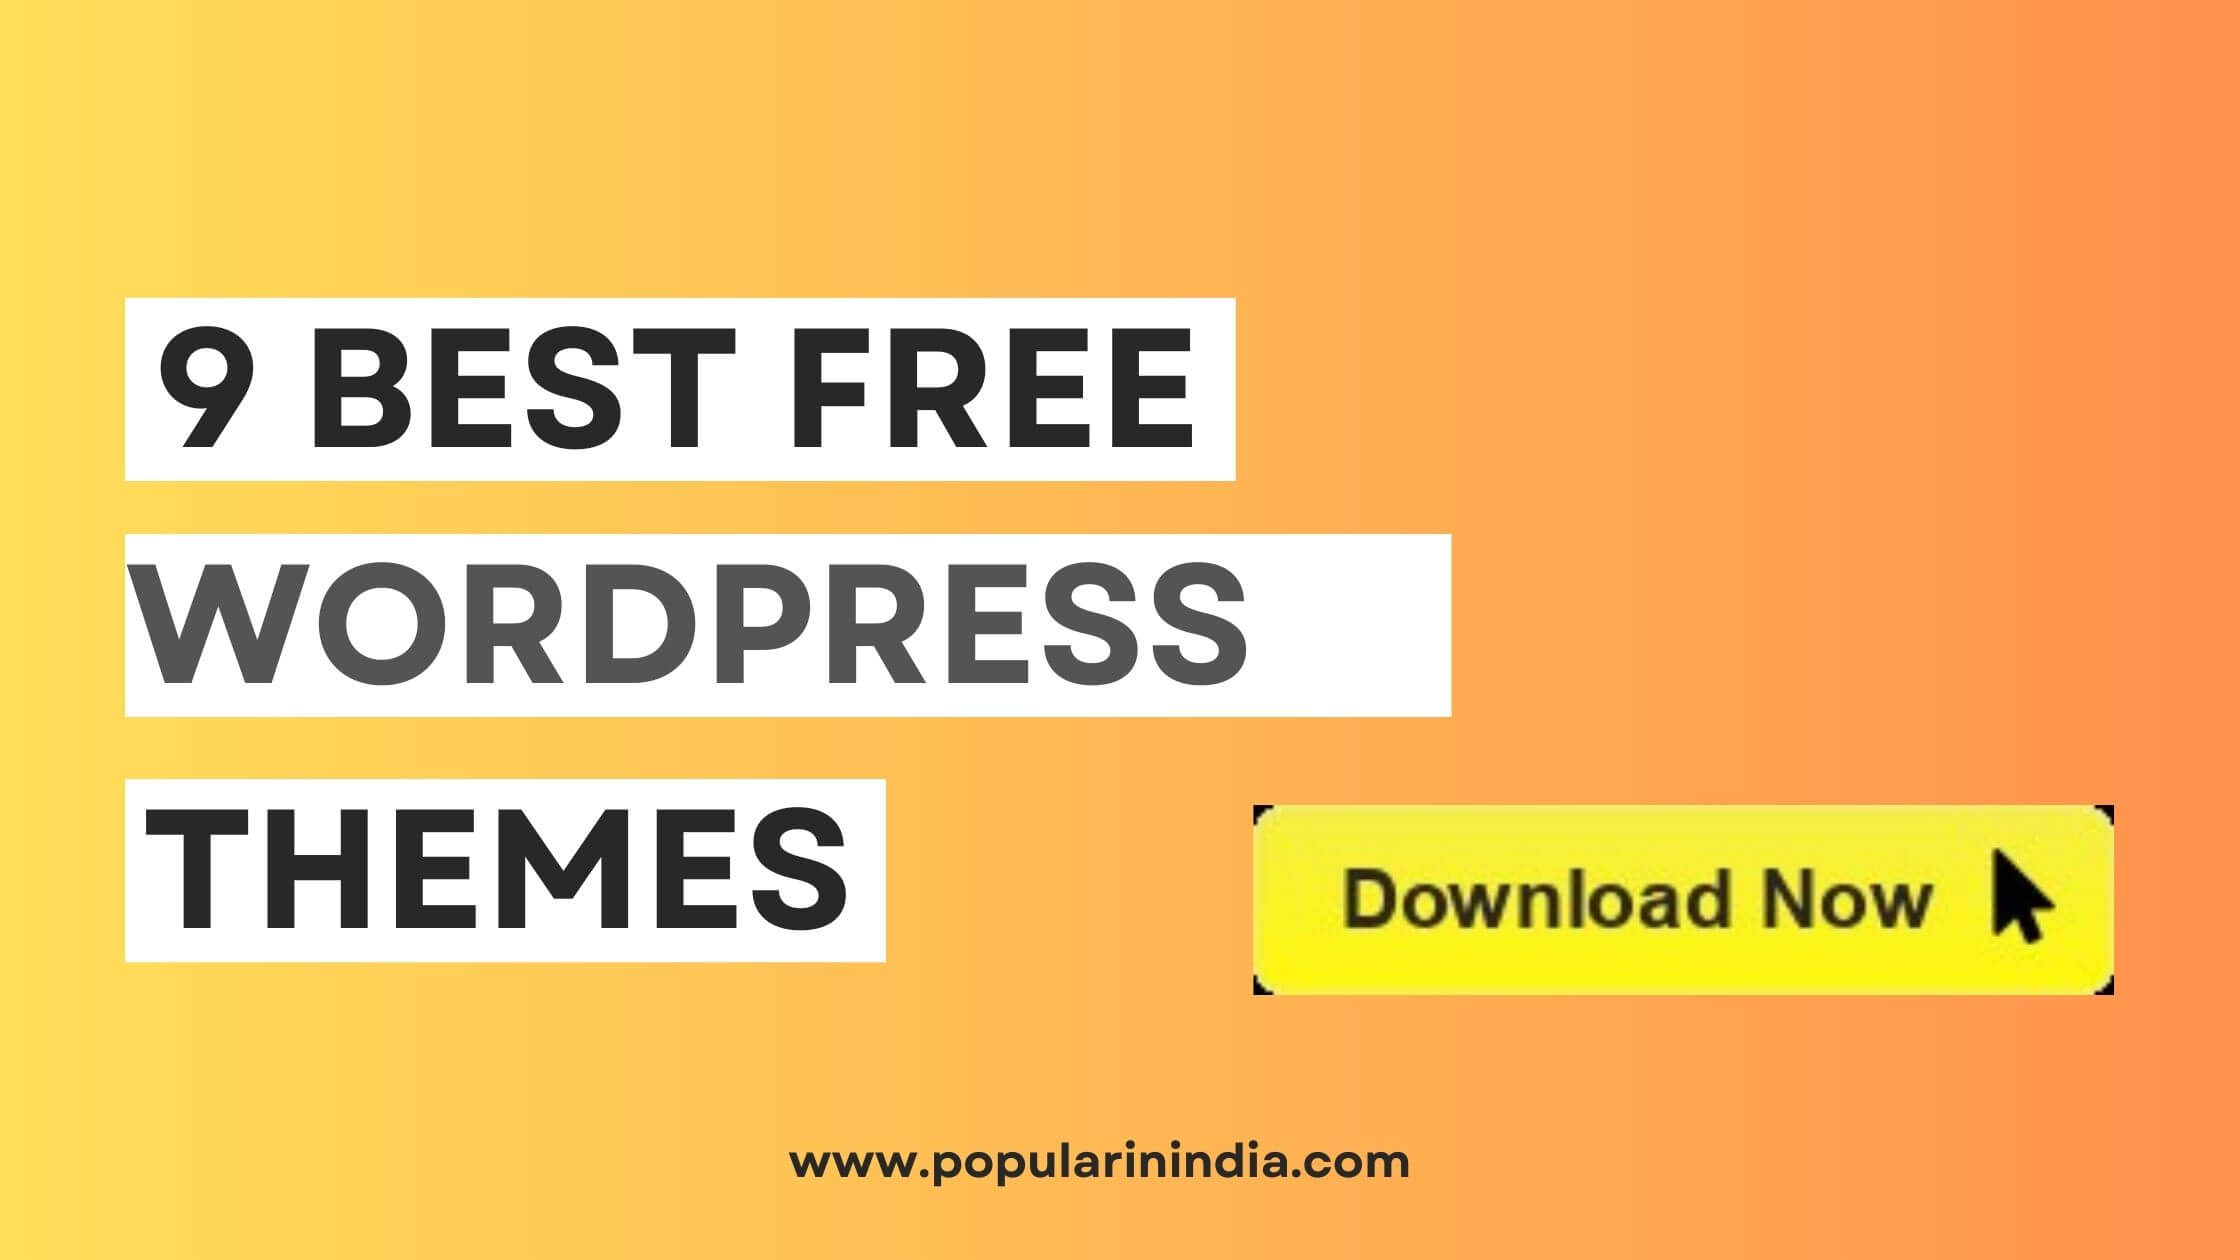 9 Best WordPress Themes to Download for Free - popular in India